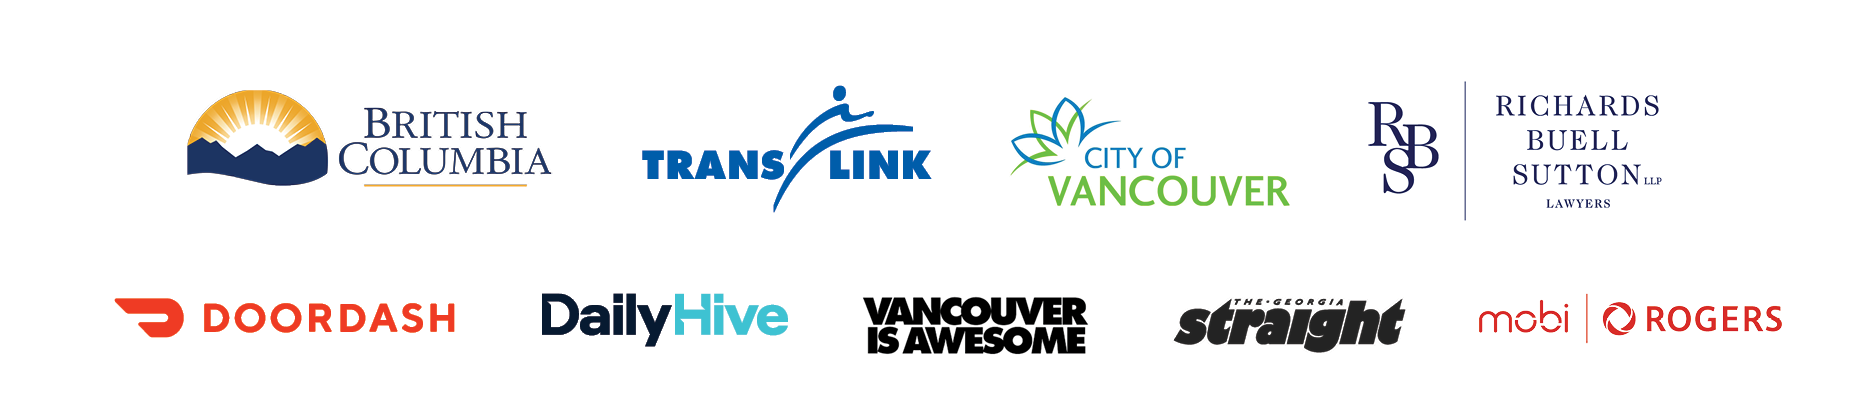 Sponsor slurry that includes logos from the Government of B.C., TransLink, City of Vancouver, Richards Buell Sutton, DoorDash, DailyHive, Vancouver Is Awesome, Georgia Straight, and Mobi by Rogers.